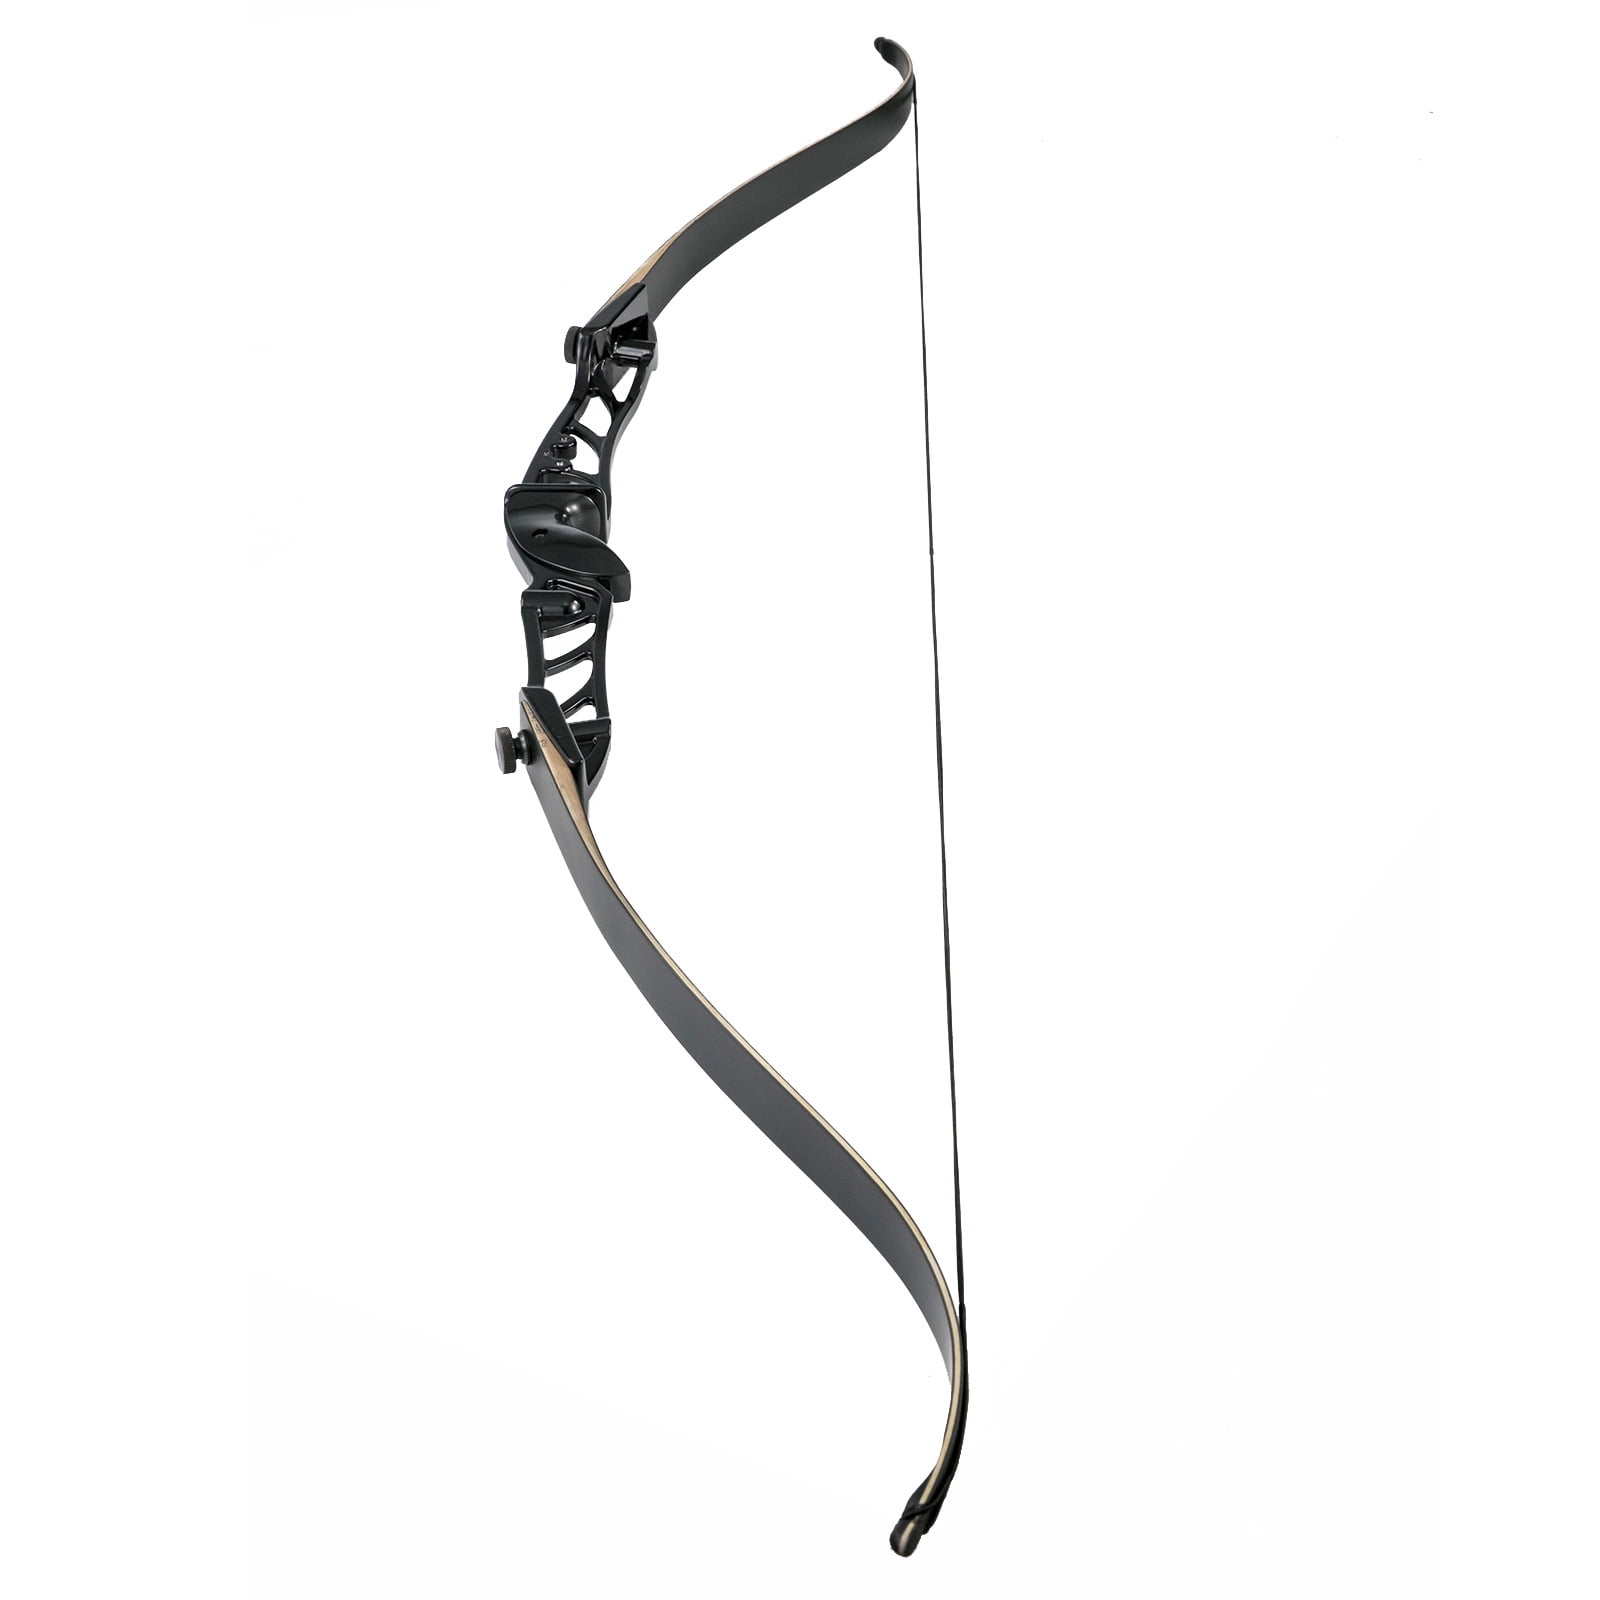 30-50 lbs Folding Bow Recurve Bow Hunting Bow American Bow Split Bow  Archery Bow for Outdoor Competition Archery